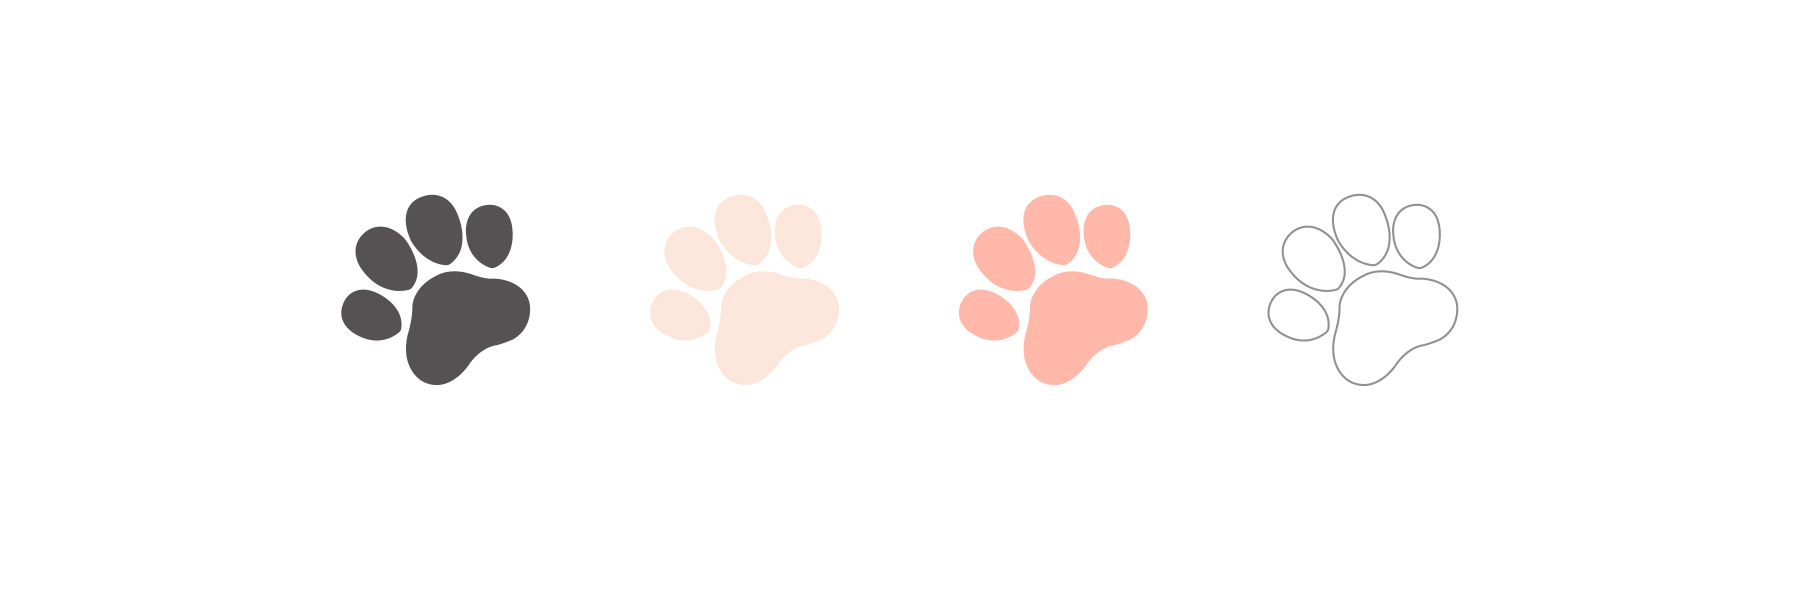 Puppy paw print drawings